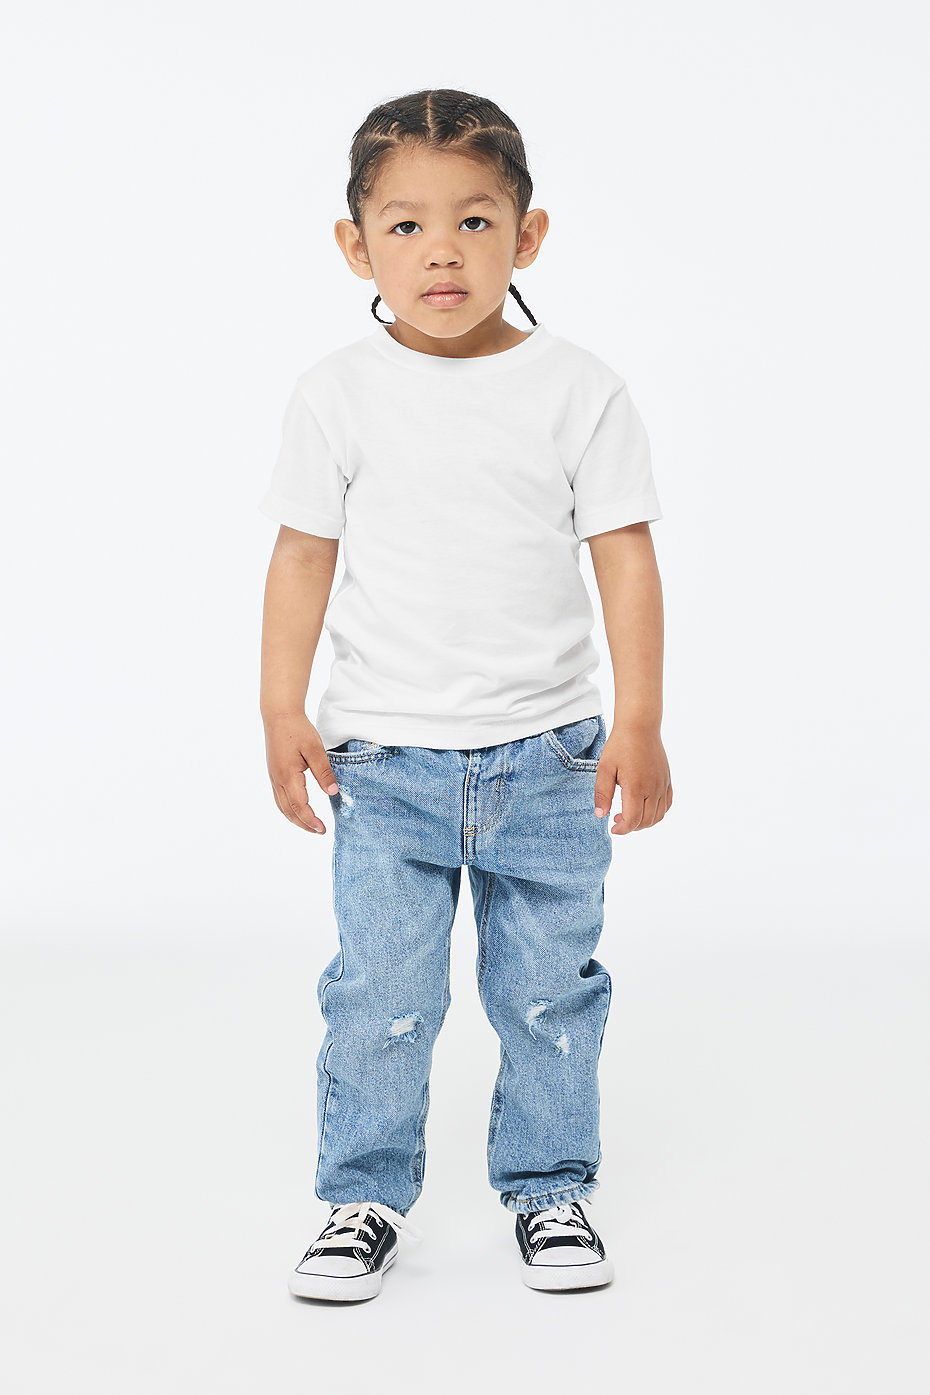 Wholesale Toddler Clothes | Toddler T Shirts | Plain Blank T Shirts ...